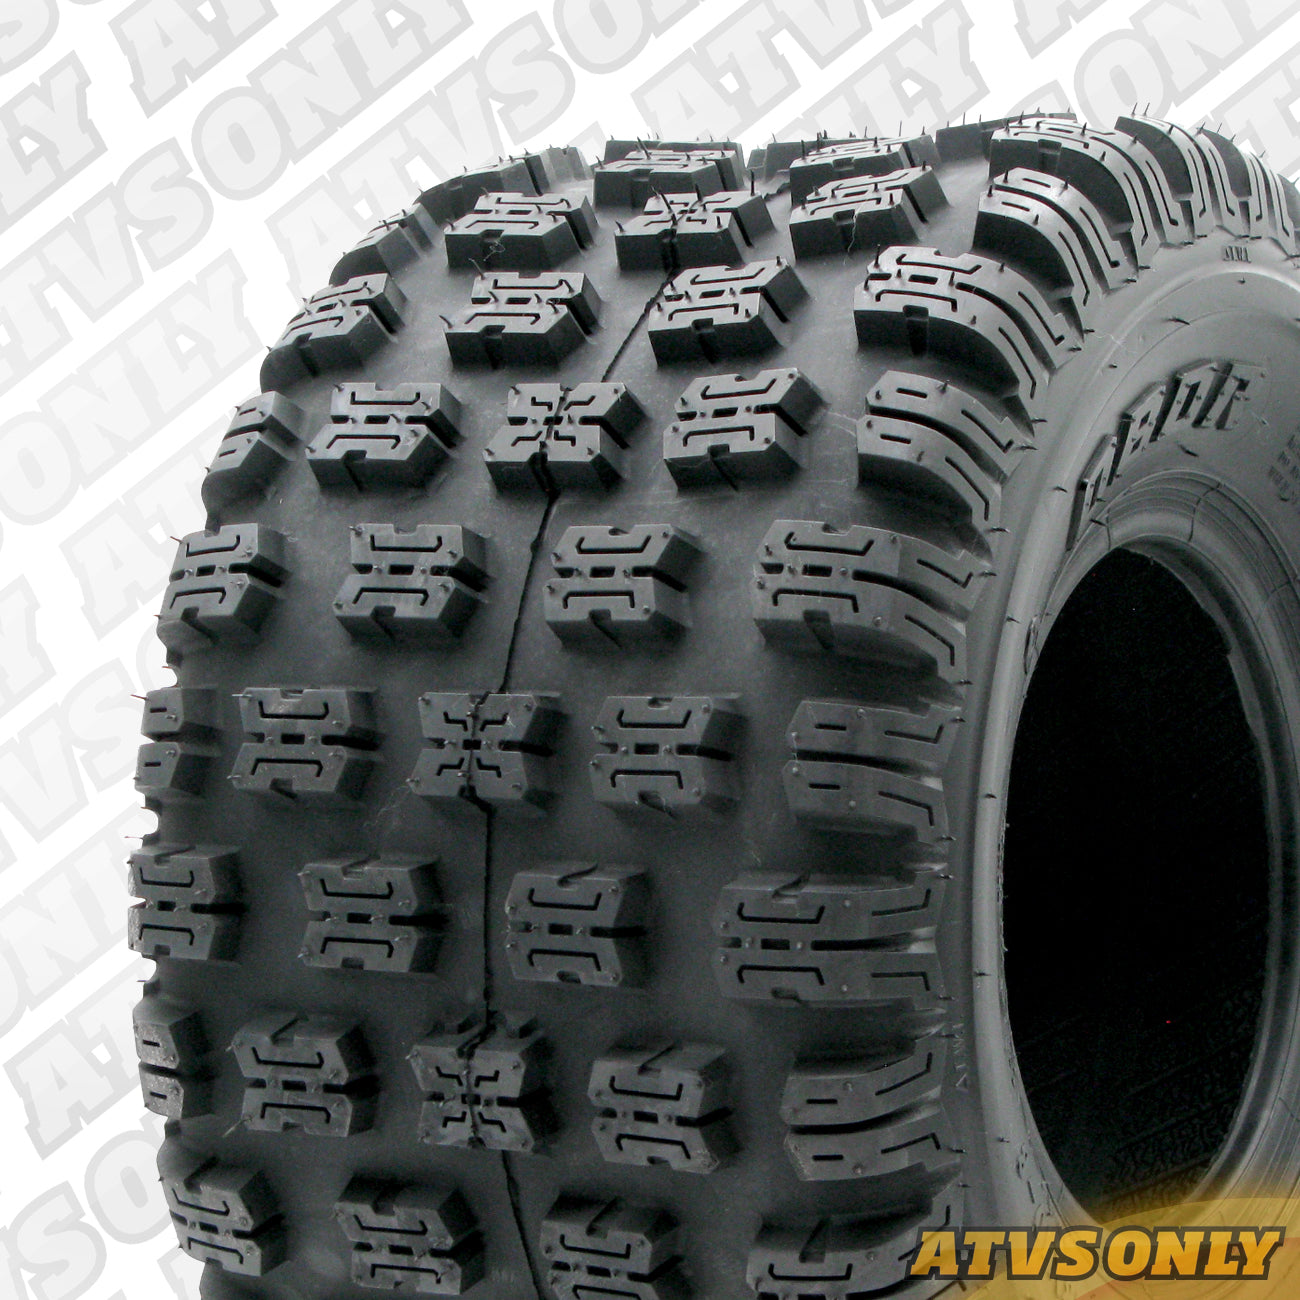 Tyres - Advent MX 8”/10” (E Marked)